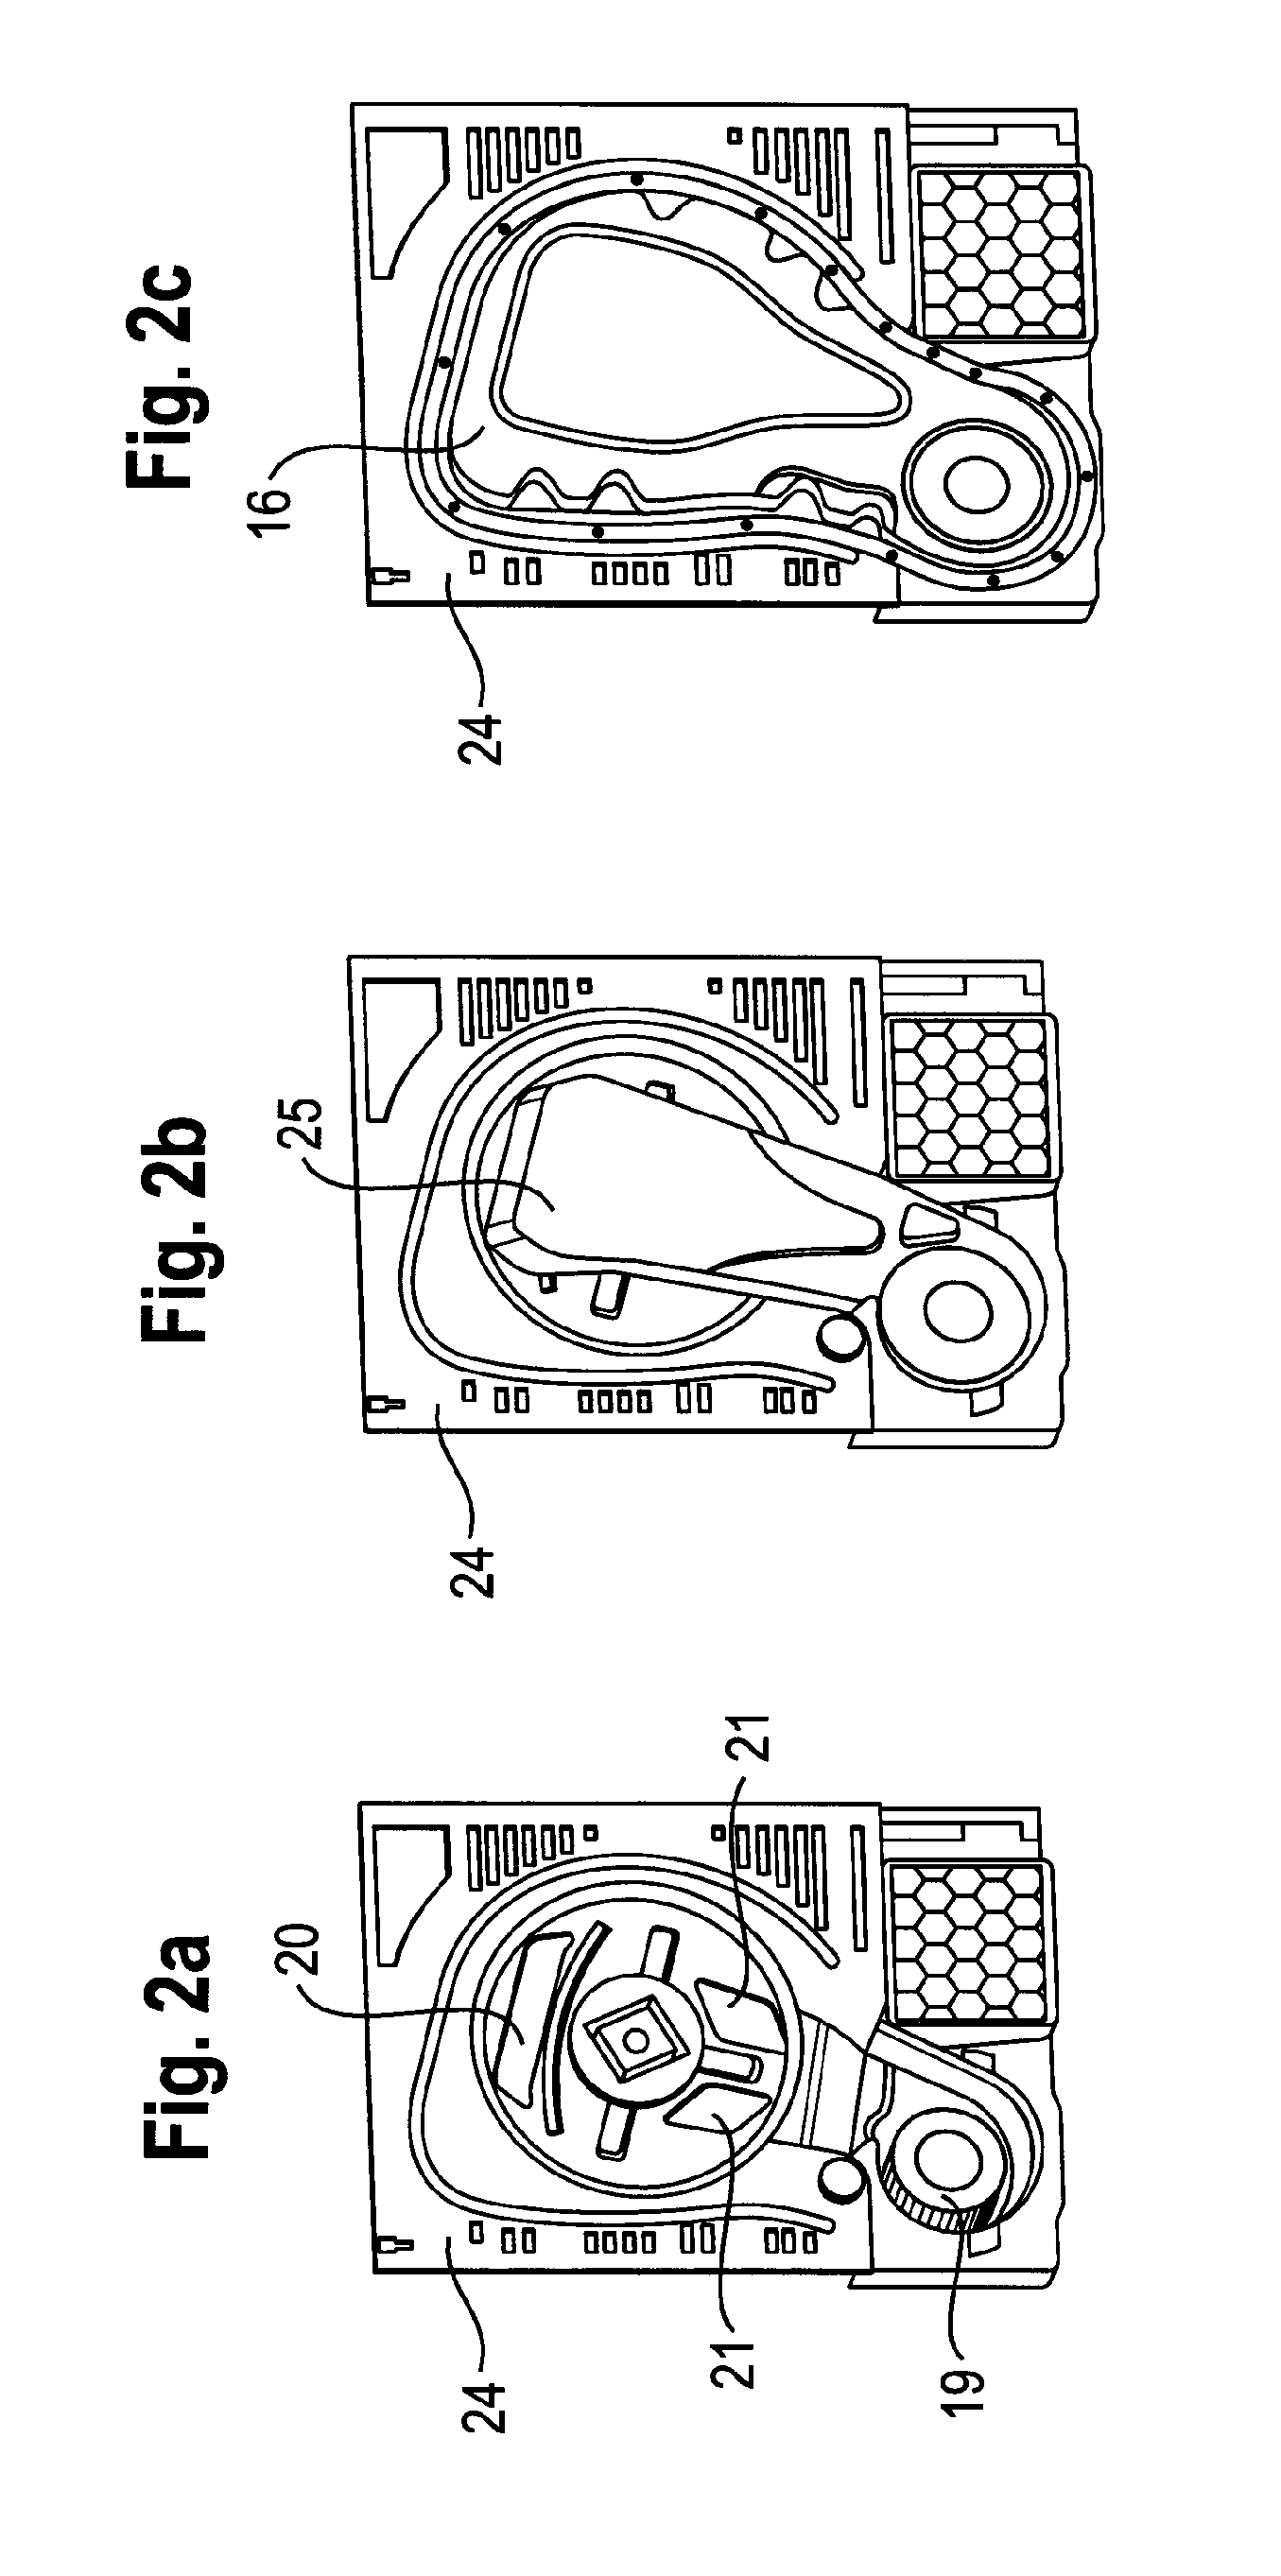 Condensation dryer with a housing